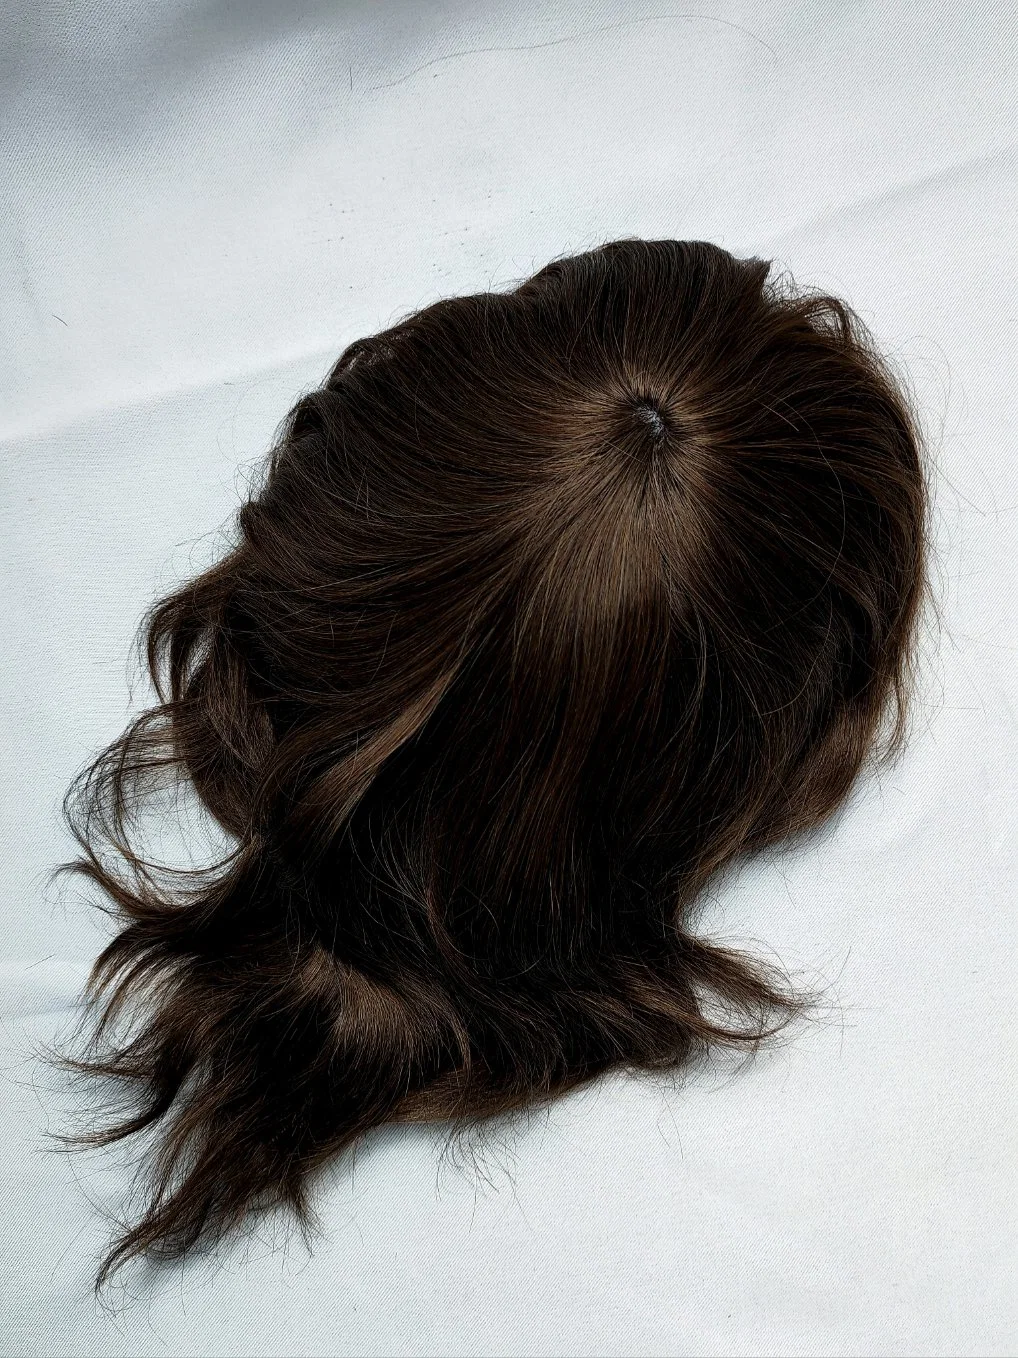 Most-Natural Single-Knotting Hair Clear-Thin-Poly Base Hair System Made of Remy-Human-Hair